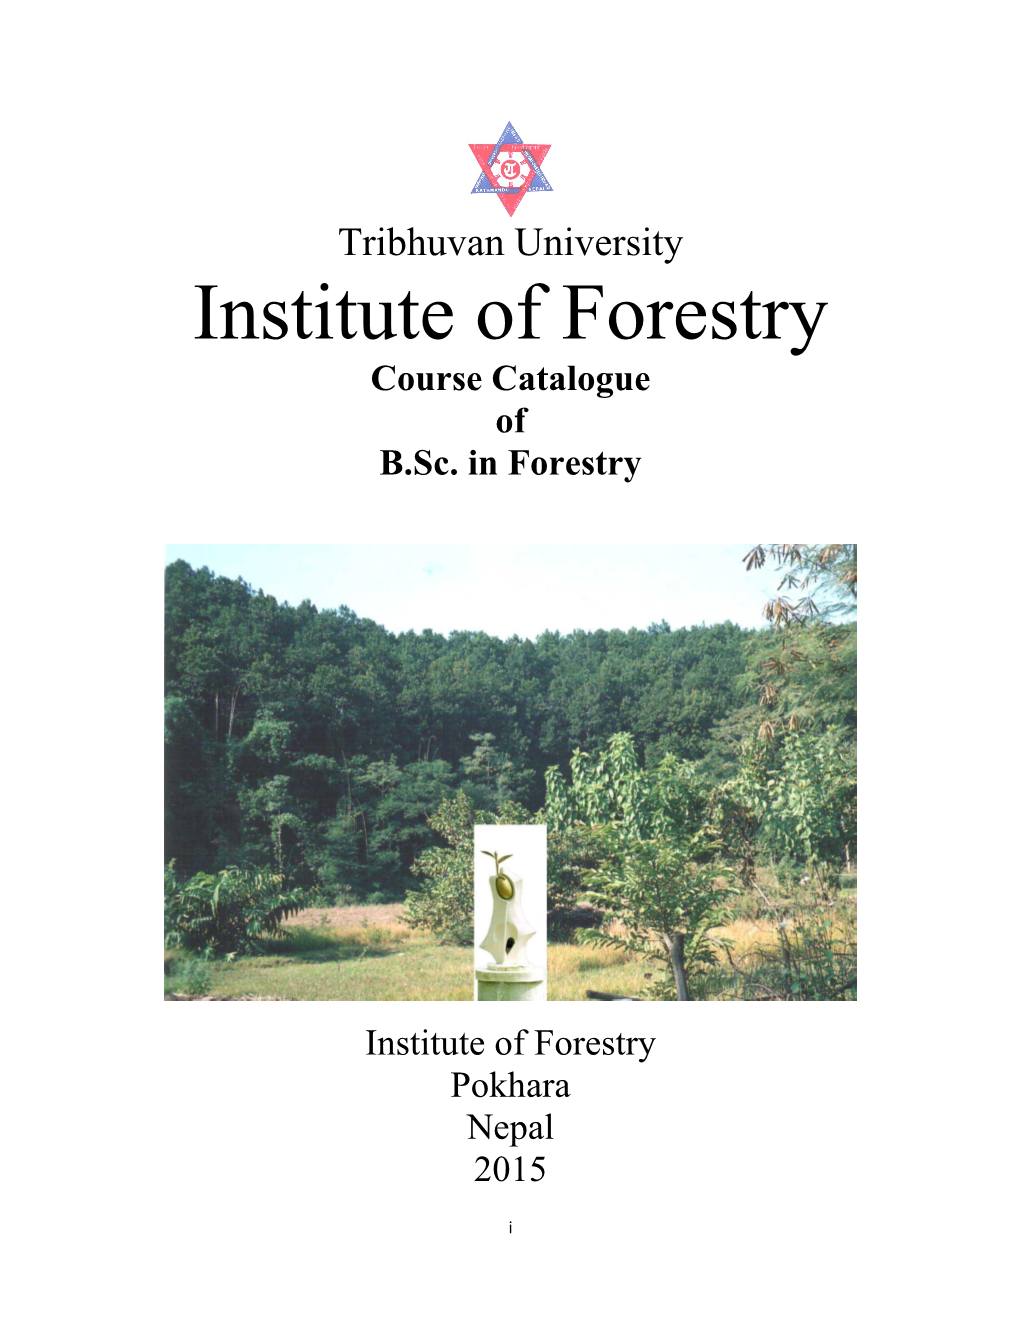 Institute of Forestry Course Catalogue of B.Sc